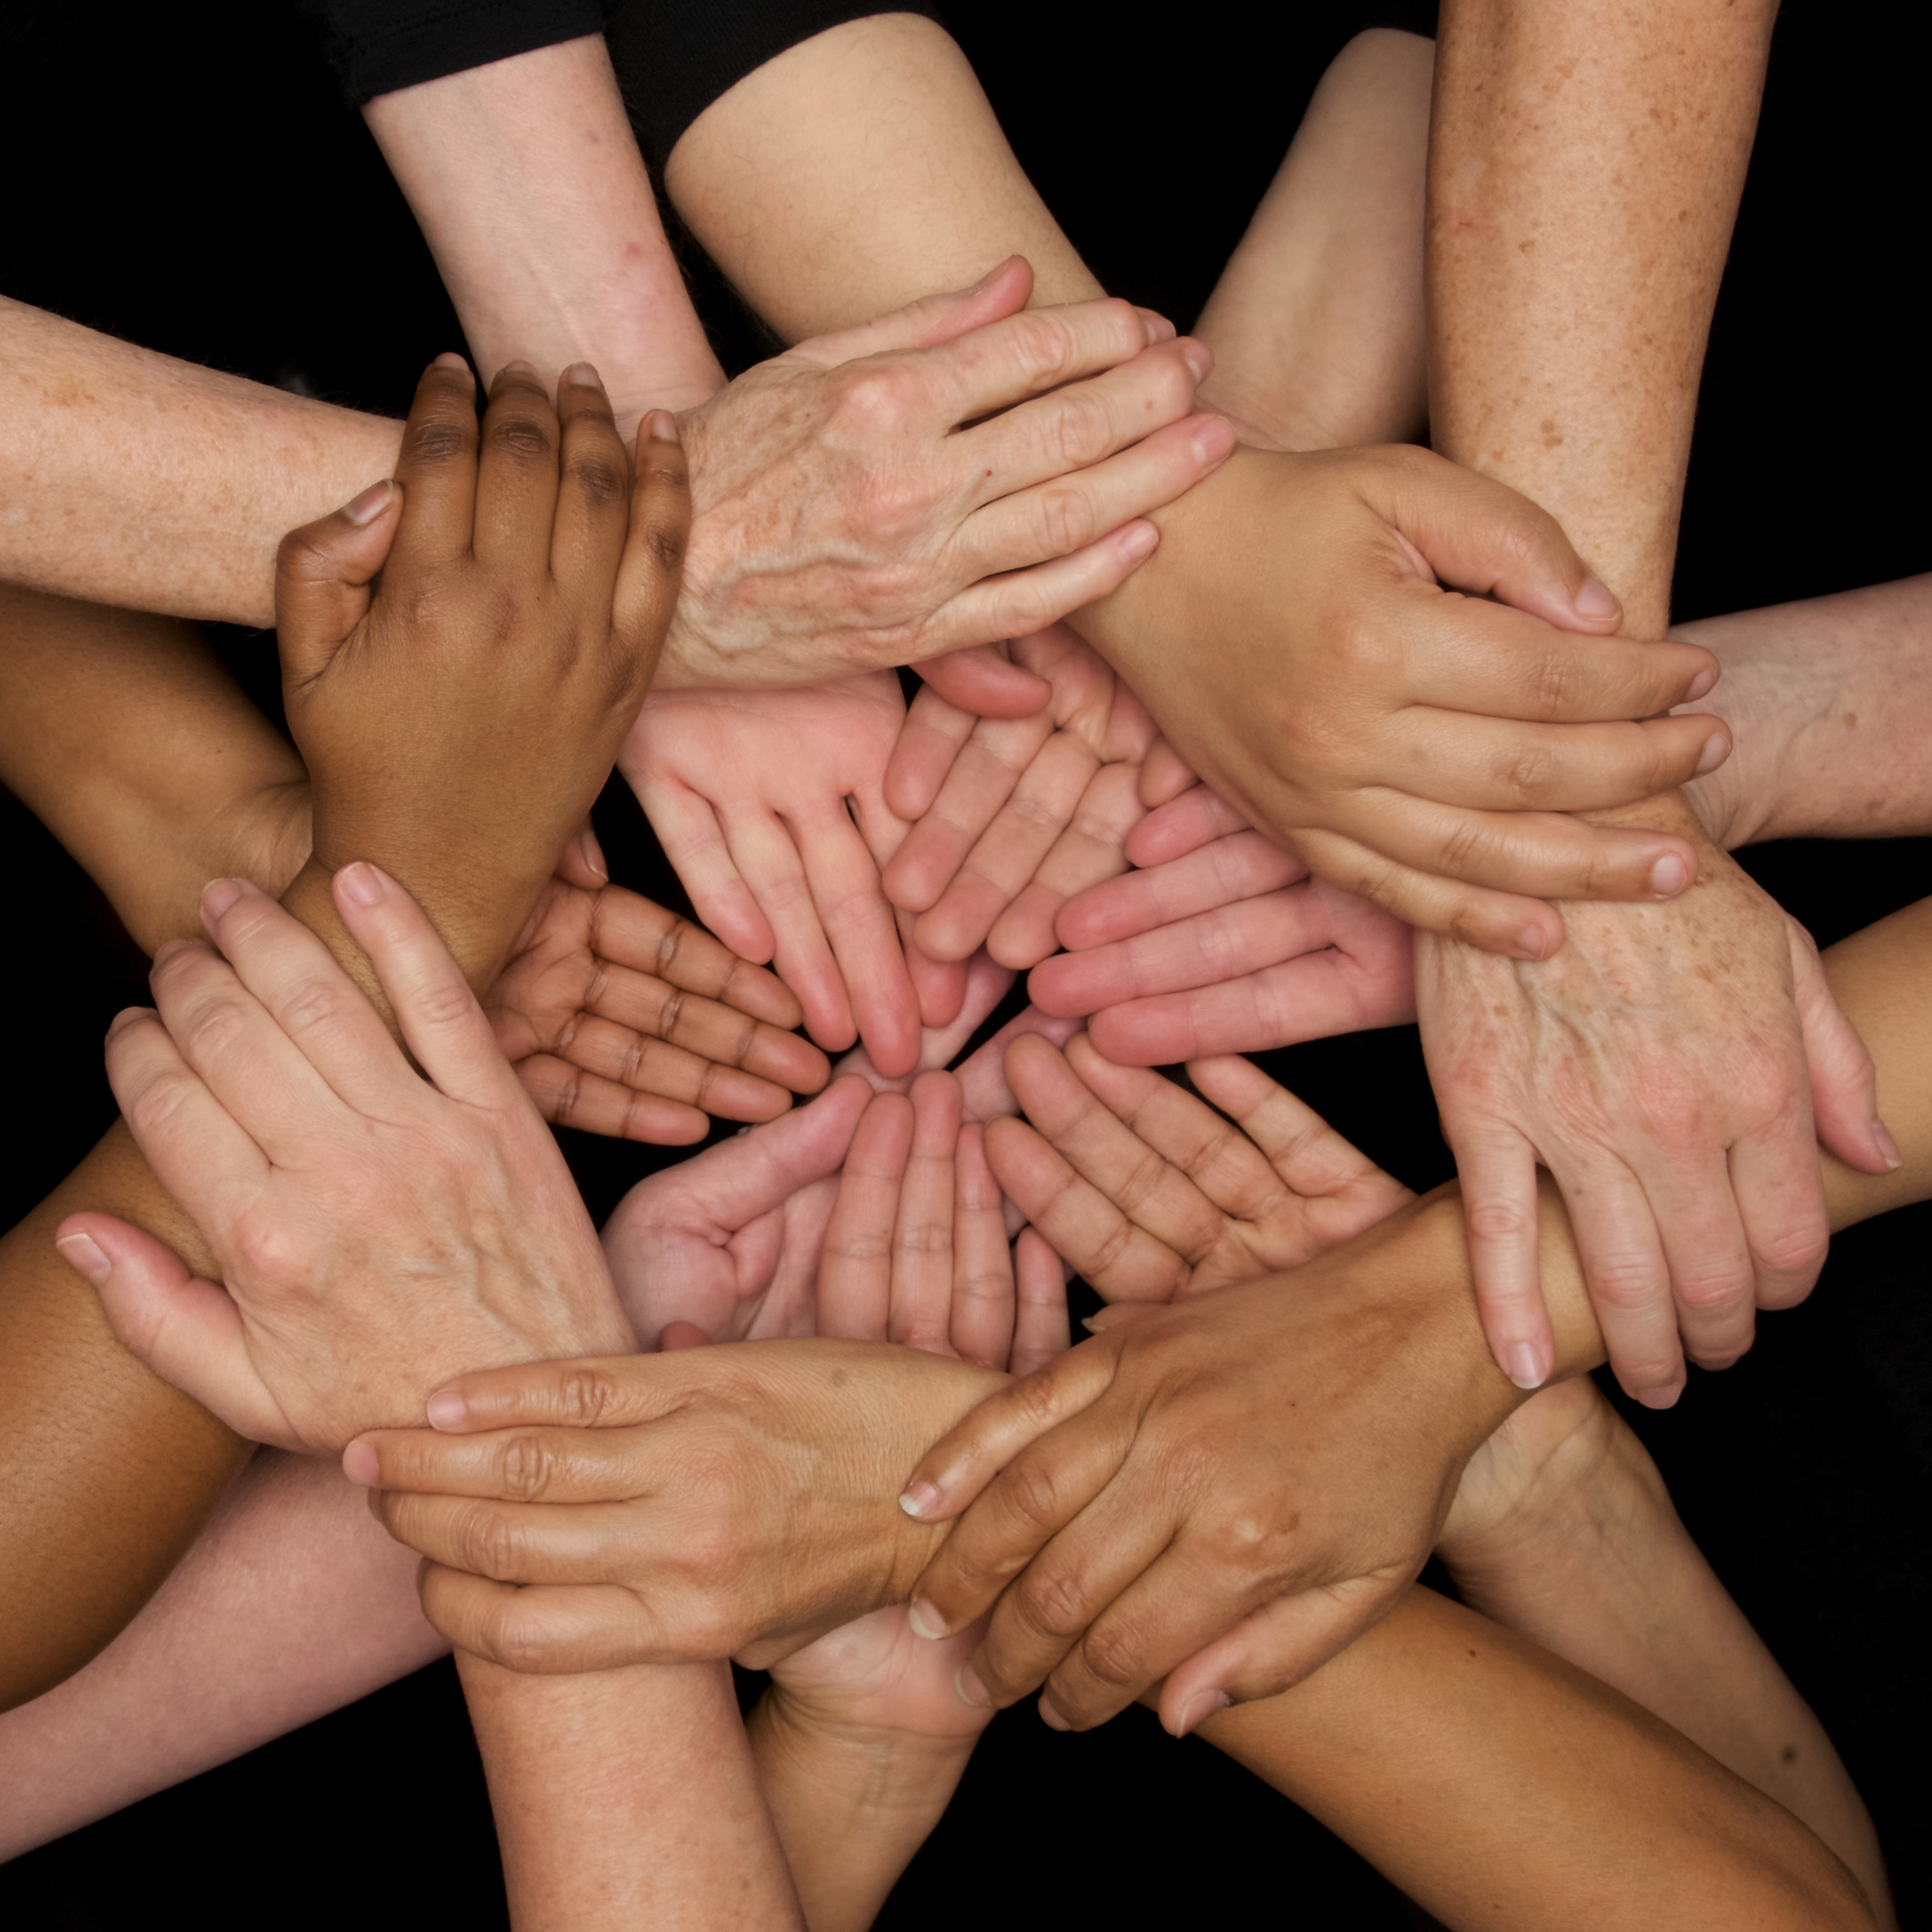 womens hands of diversity, empowerment and equality